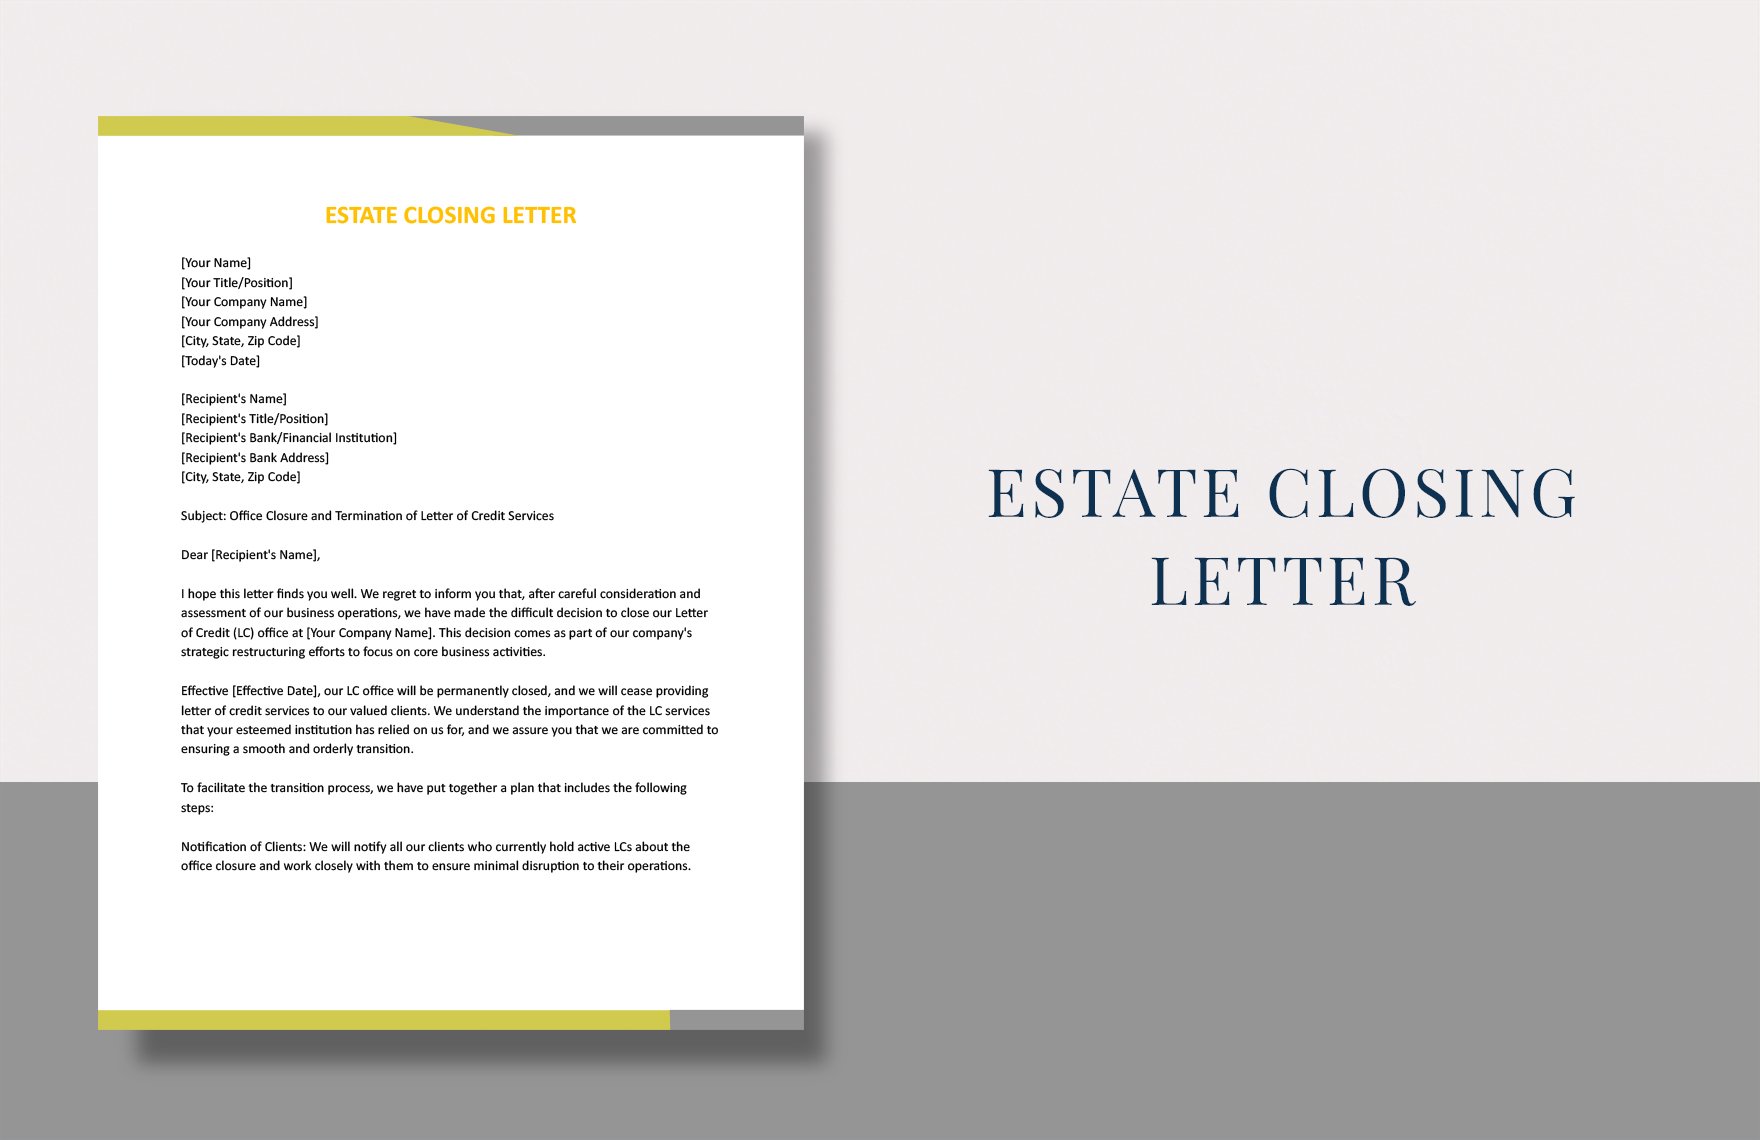 Estate Closing Letter in Word, Google Docs, Apple Pages